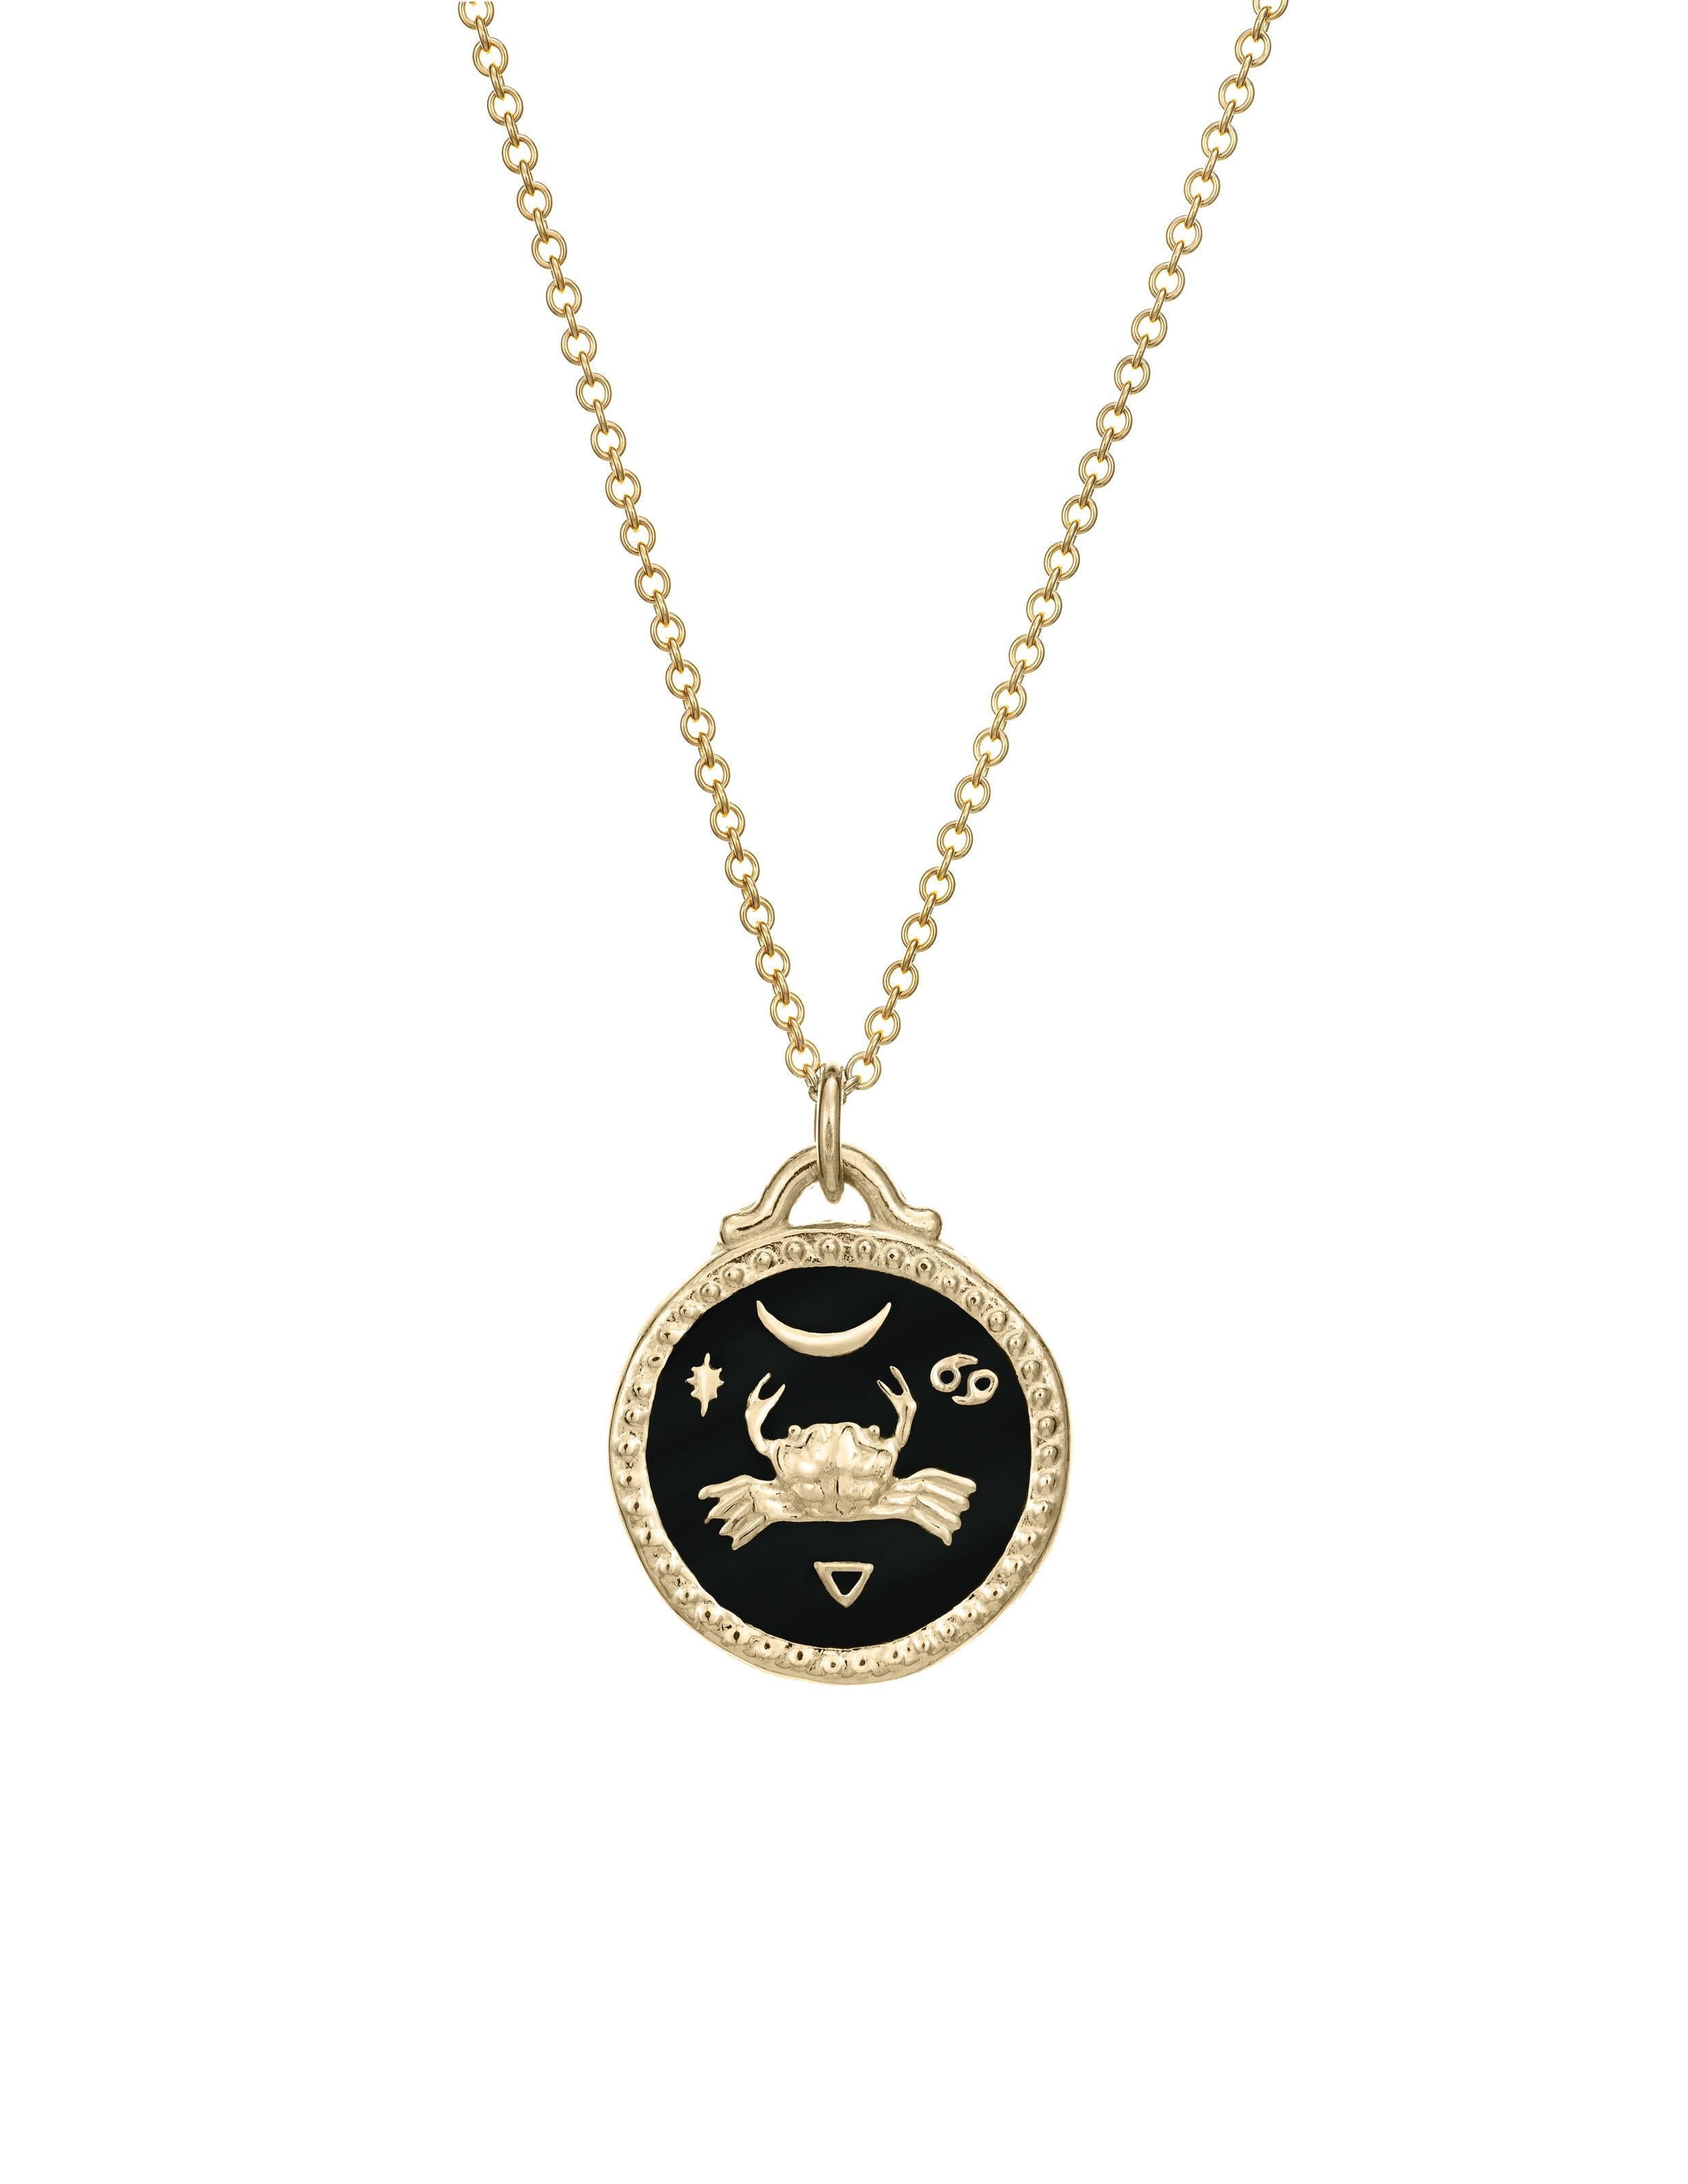 Part of our new Zodiac collection. The Cancer Pendant features a crab on one side and the Cancer symbol on the other. Designs are meticulously hand-carved into 14k gold and finished with enamel. This pendant is customizable and available in four